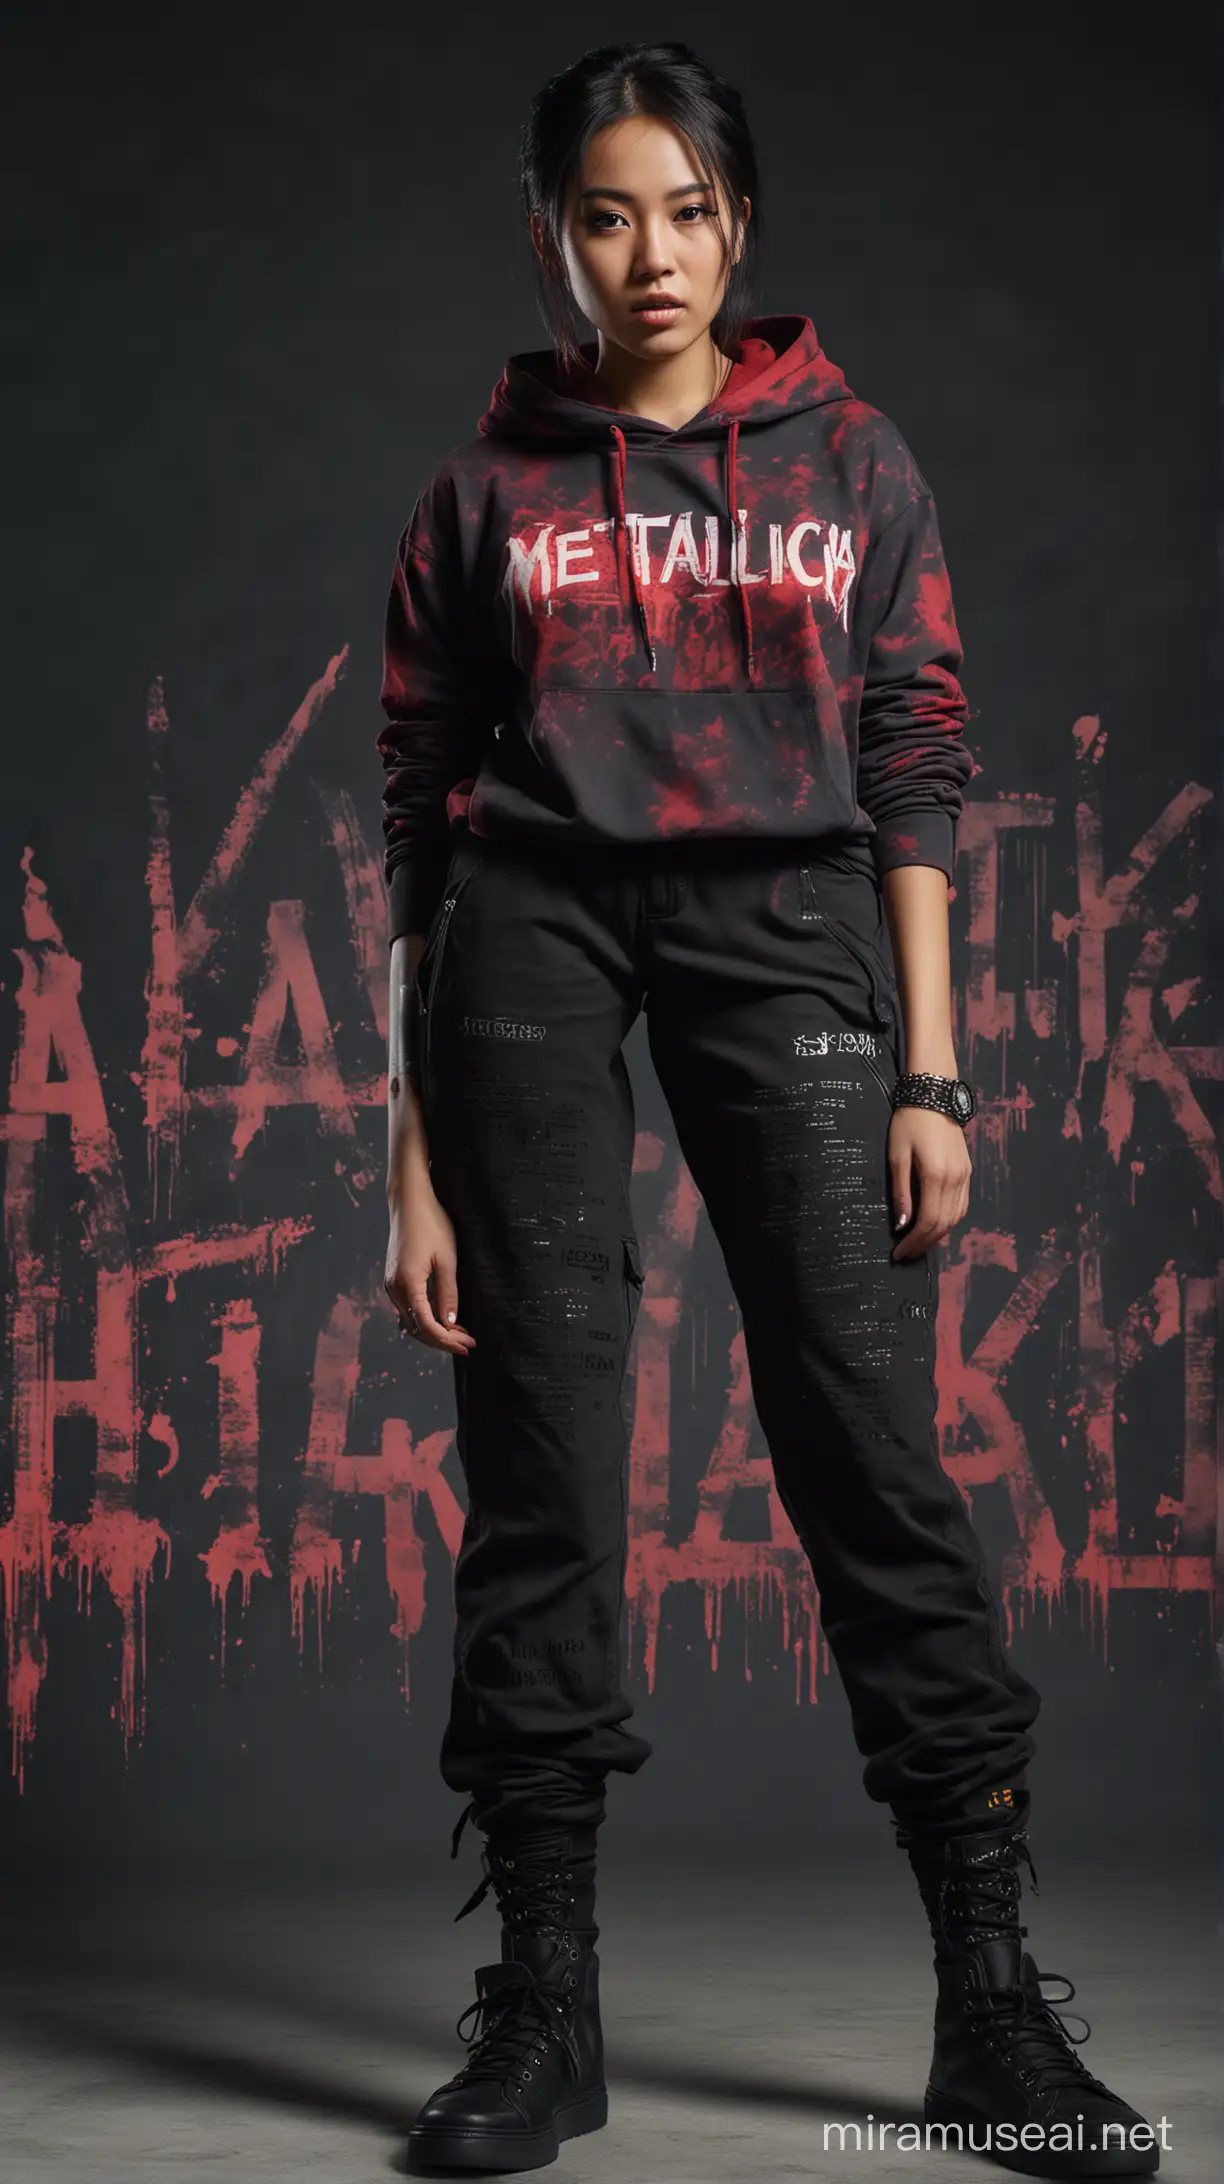 lissajous in the form of complicated metallica text, complicated gothic text, red and black, very beautiful Asian girl, cool expression, few tattoos, black bracelet, wearing a hoodie ("FRISKA") tie dye screen printed t-shirt written with complicated metal text ("FRISKA"), long cargo pants, senaekers shoes, background with lots of lissajous shaped text ("FRISKA") complicated metal, complicated gothic, dramatic colorful light, hyper realistic , sharp focus makes the image very detailed , aesthetics, sharp contrast , 64k megapixels, ultra HD